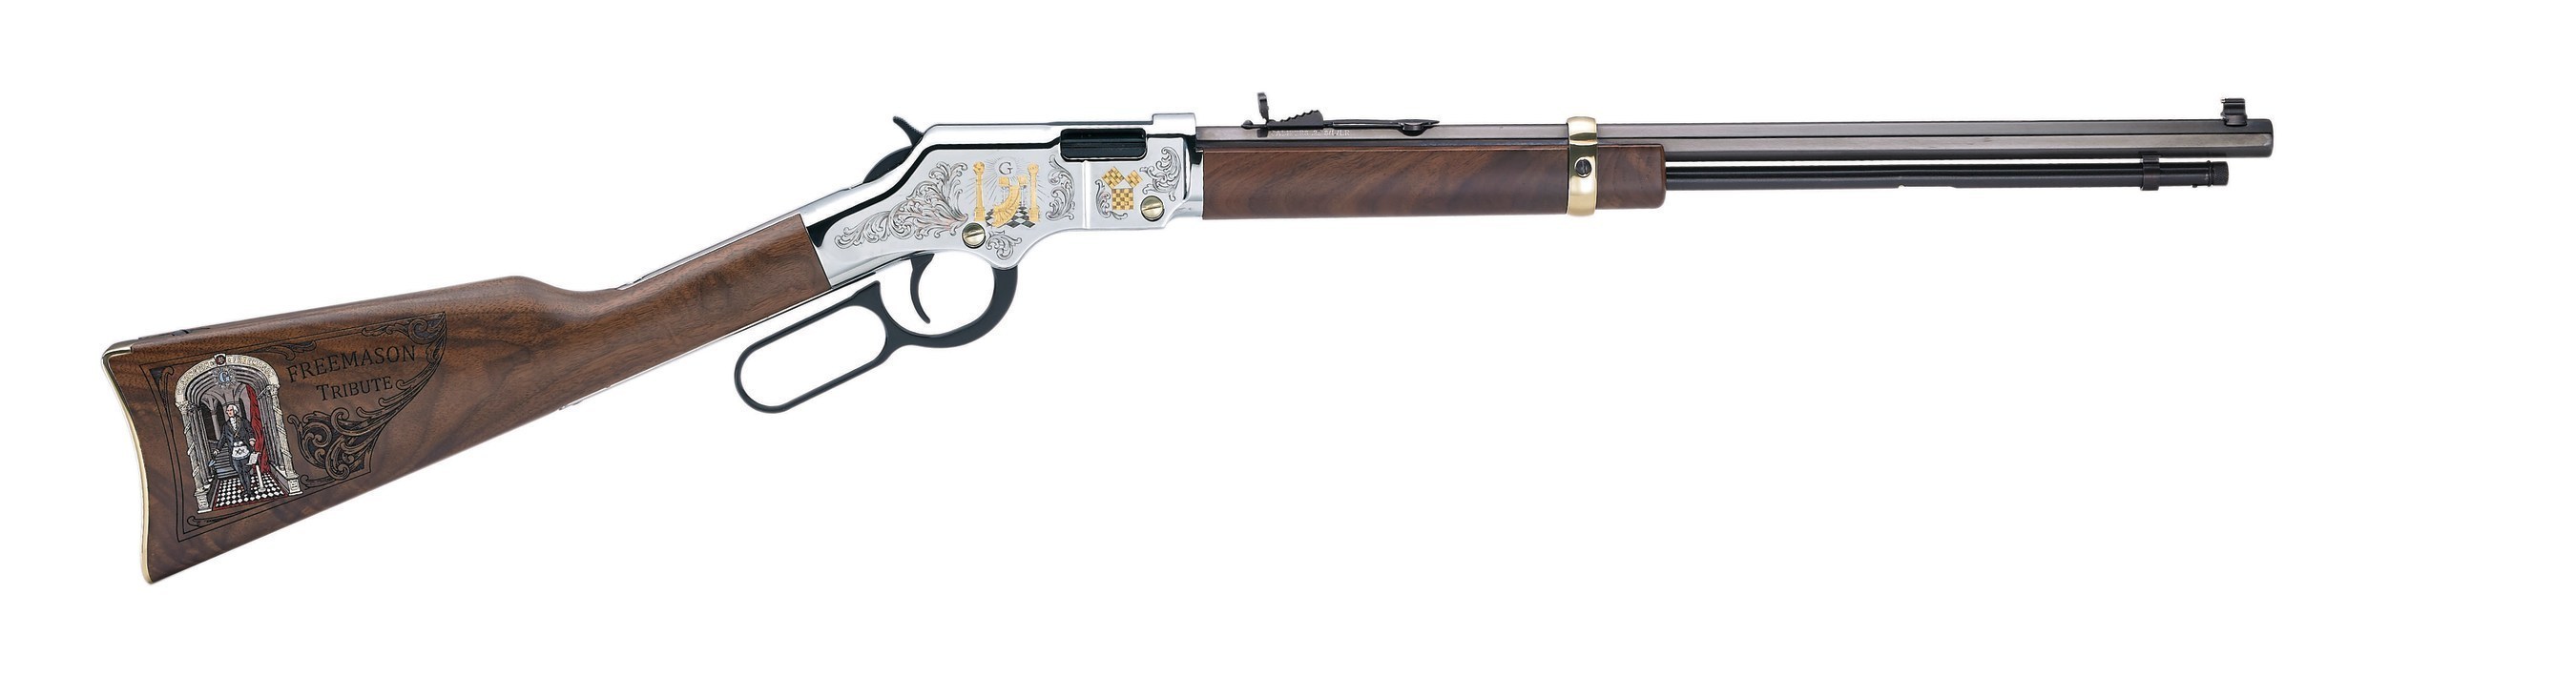 The Henry Golden Boy Freemasons Tribute Edition Rifle. Visit henryrifles.com to learn more.